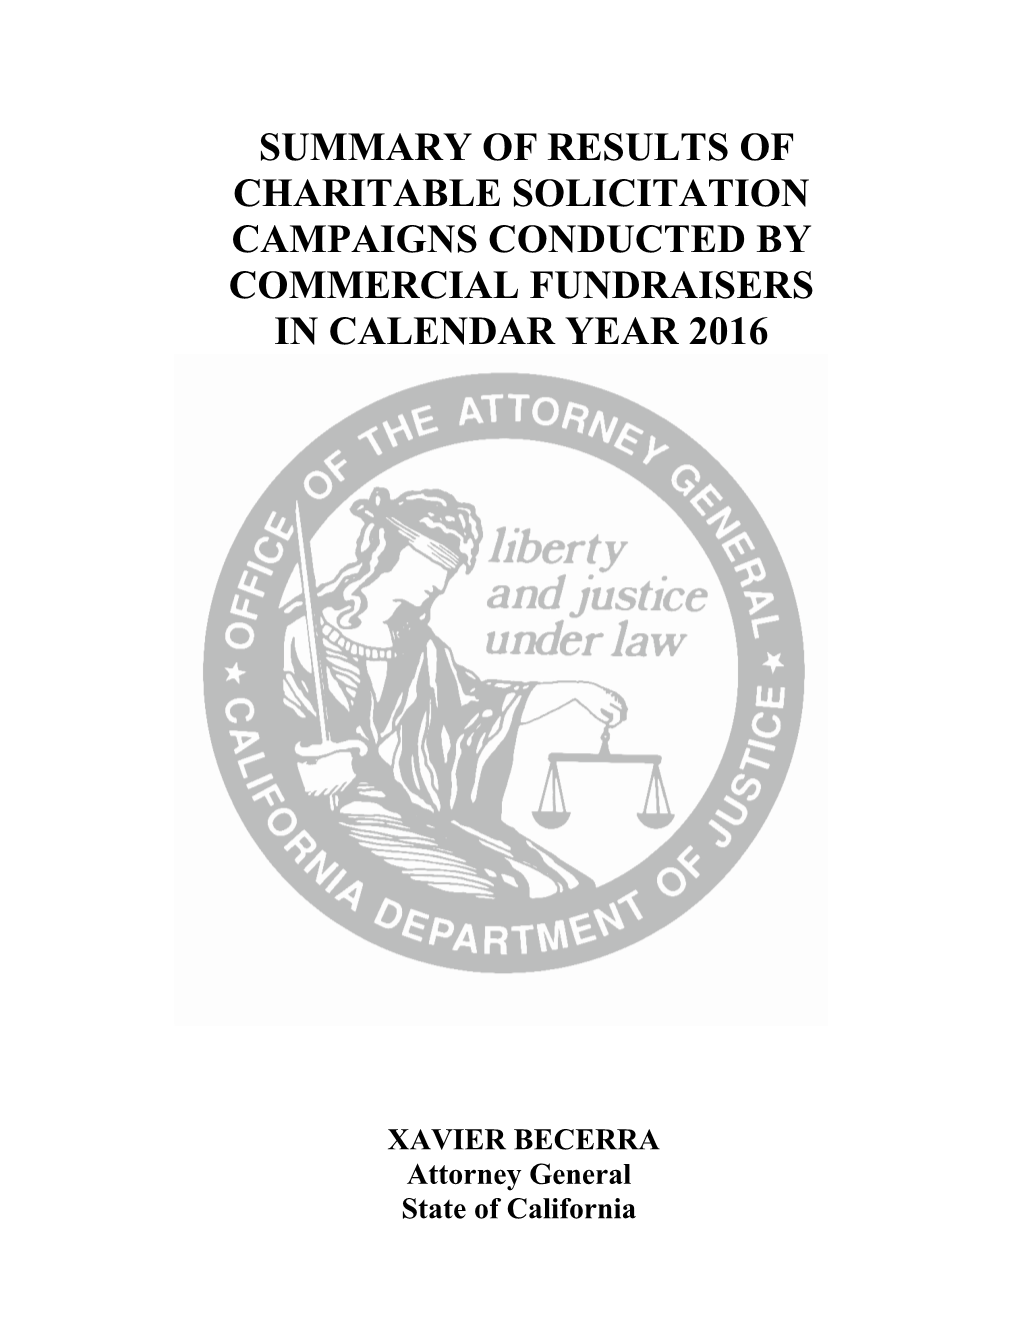 Summary of Results of Charitable Solicitation Campaigns Conducted by Commercial Fundraisers in Calendar Year 2016